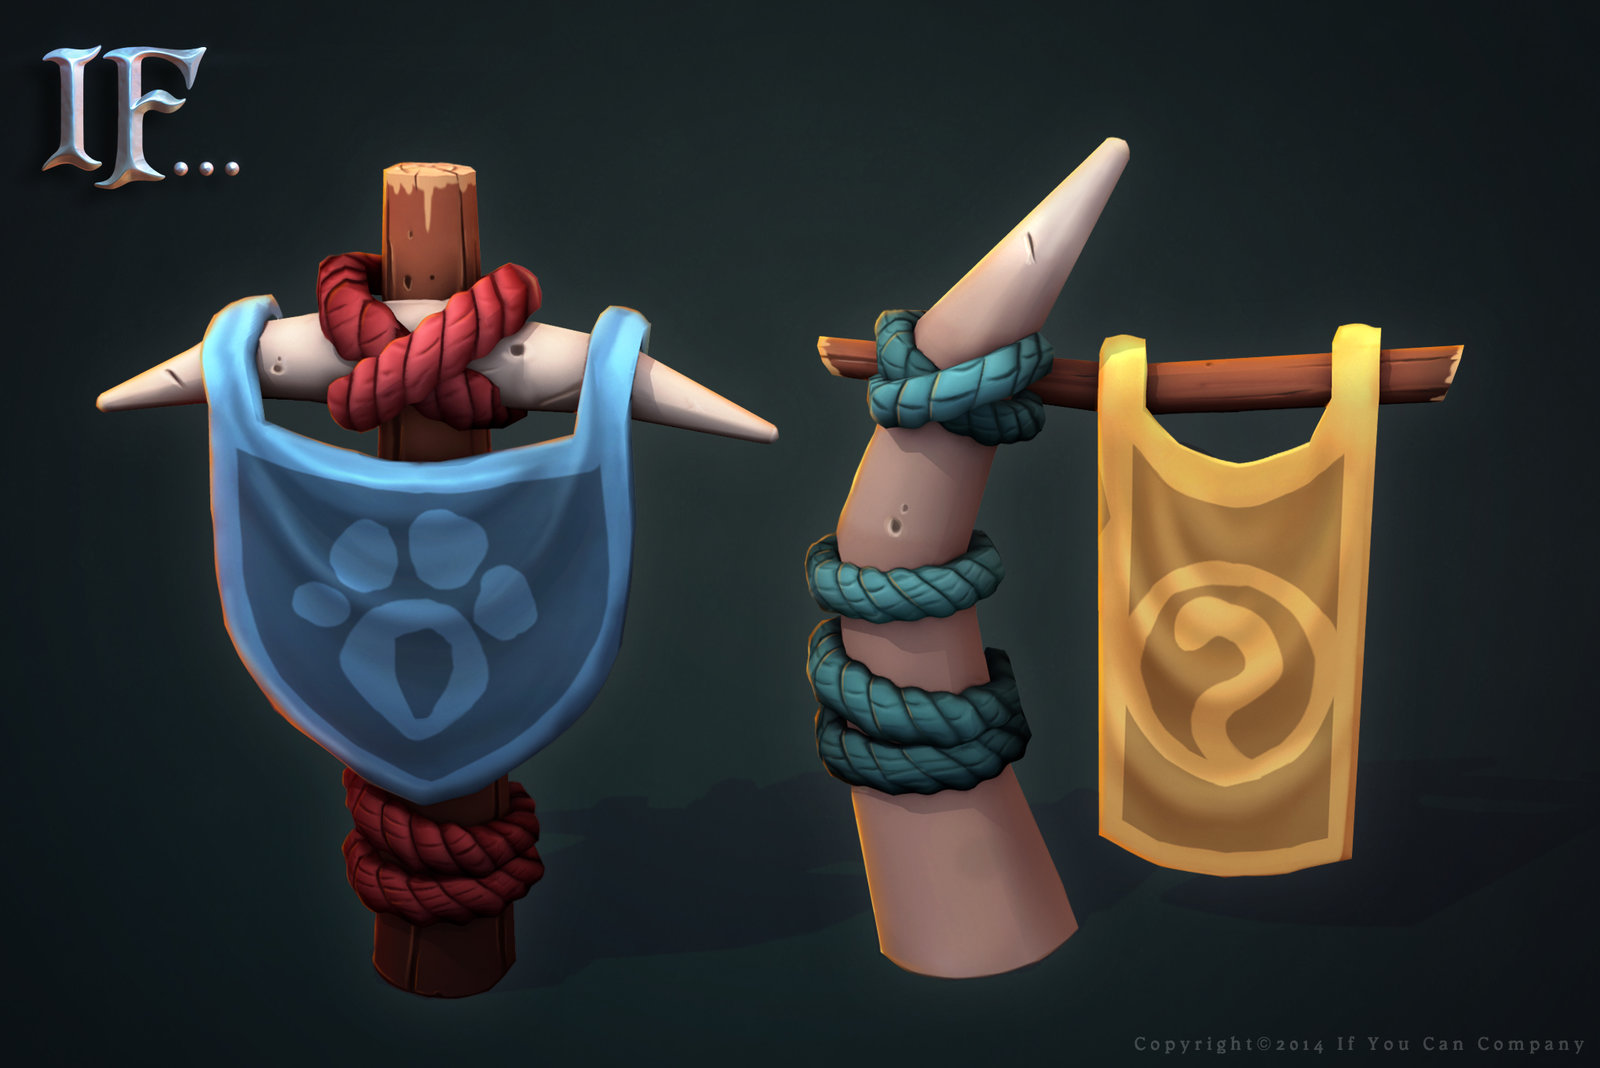 Bluepaws and Yellowtails gang banners. Modeled and textured by me.